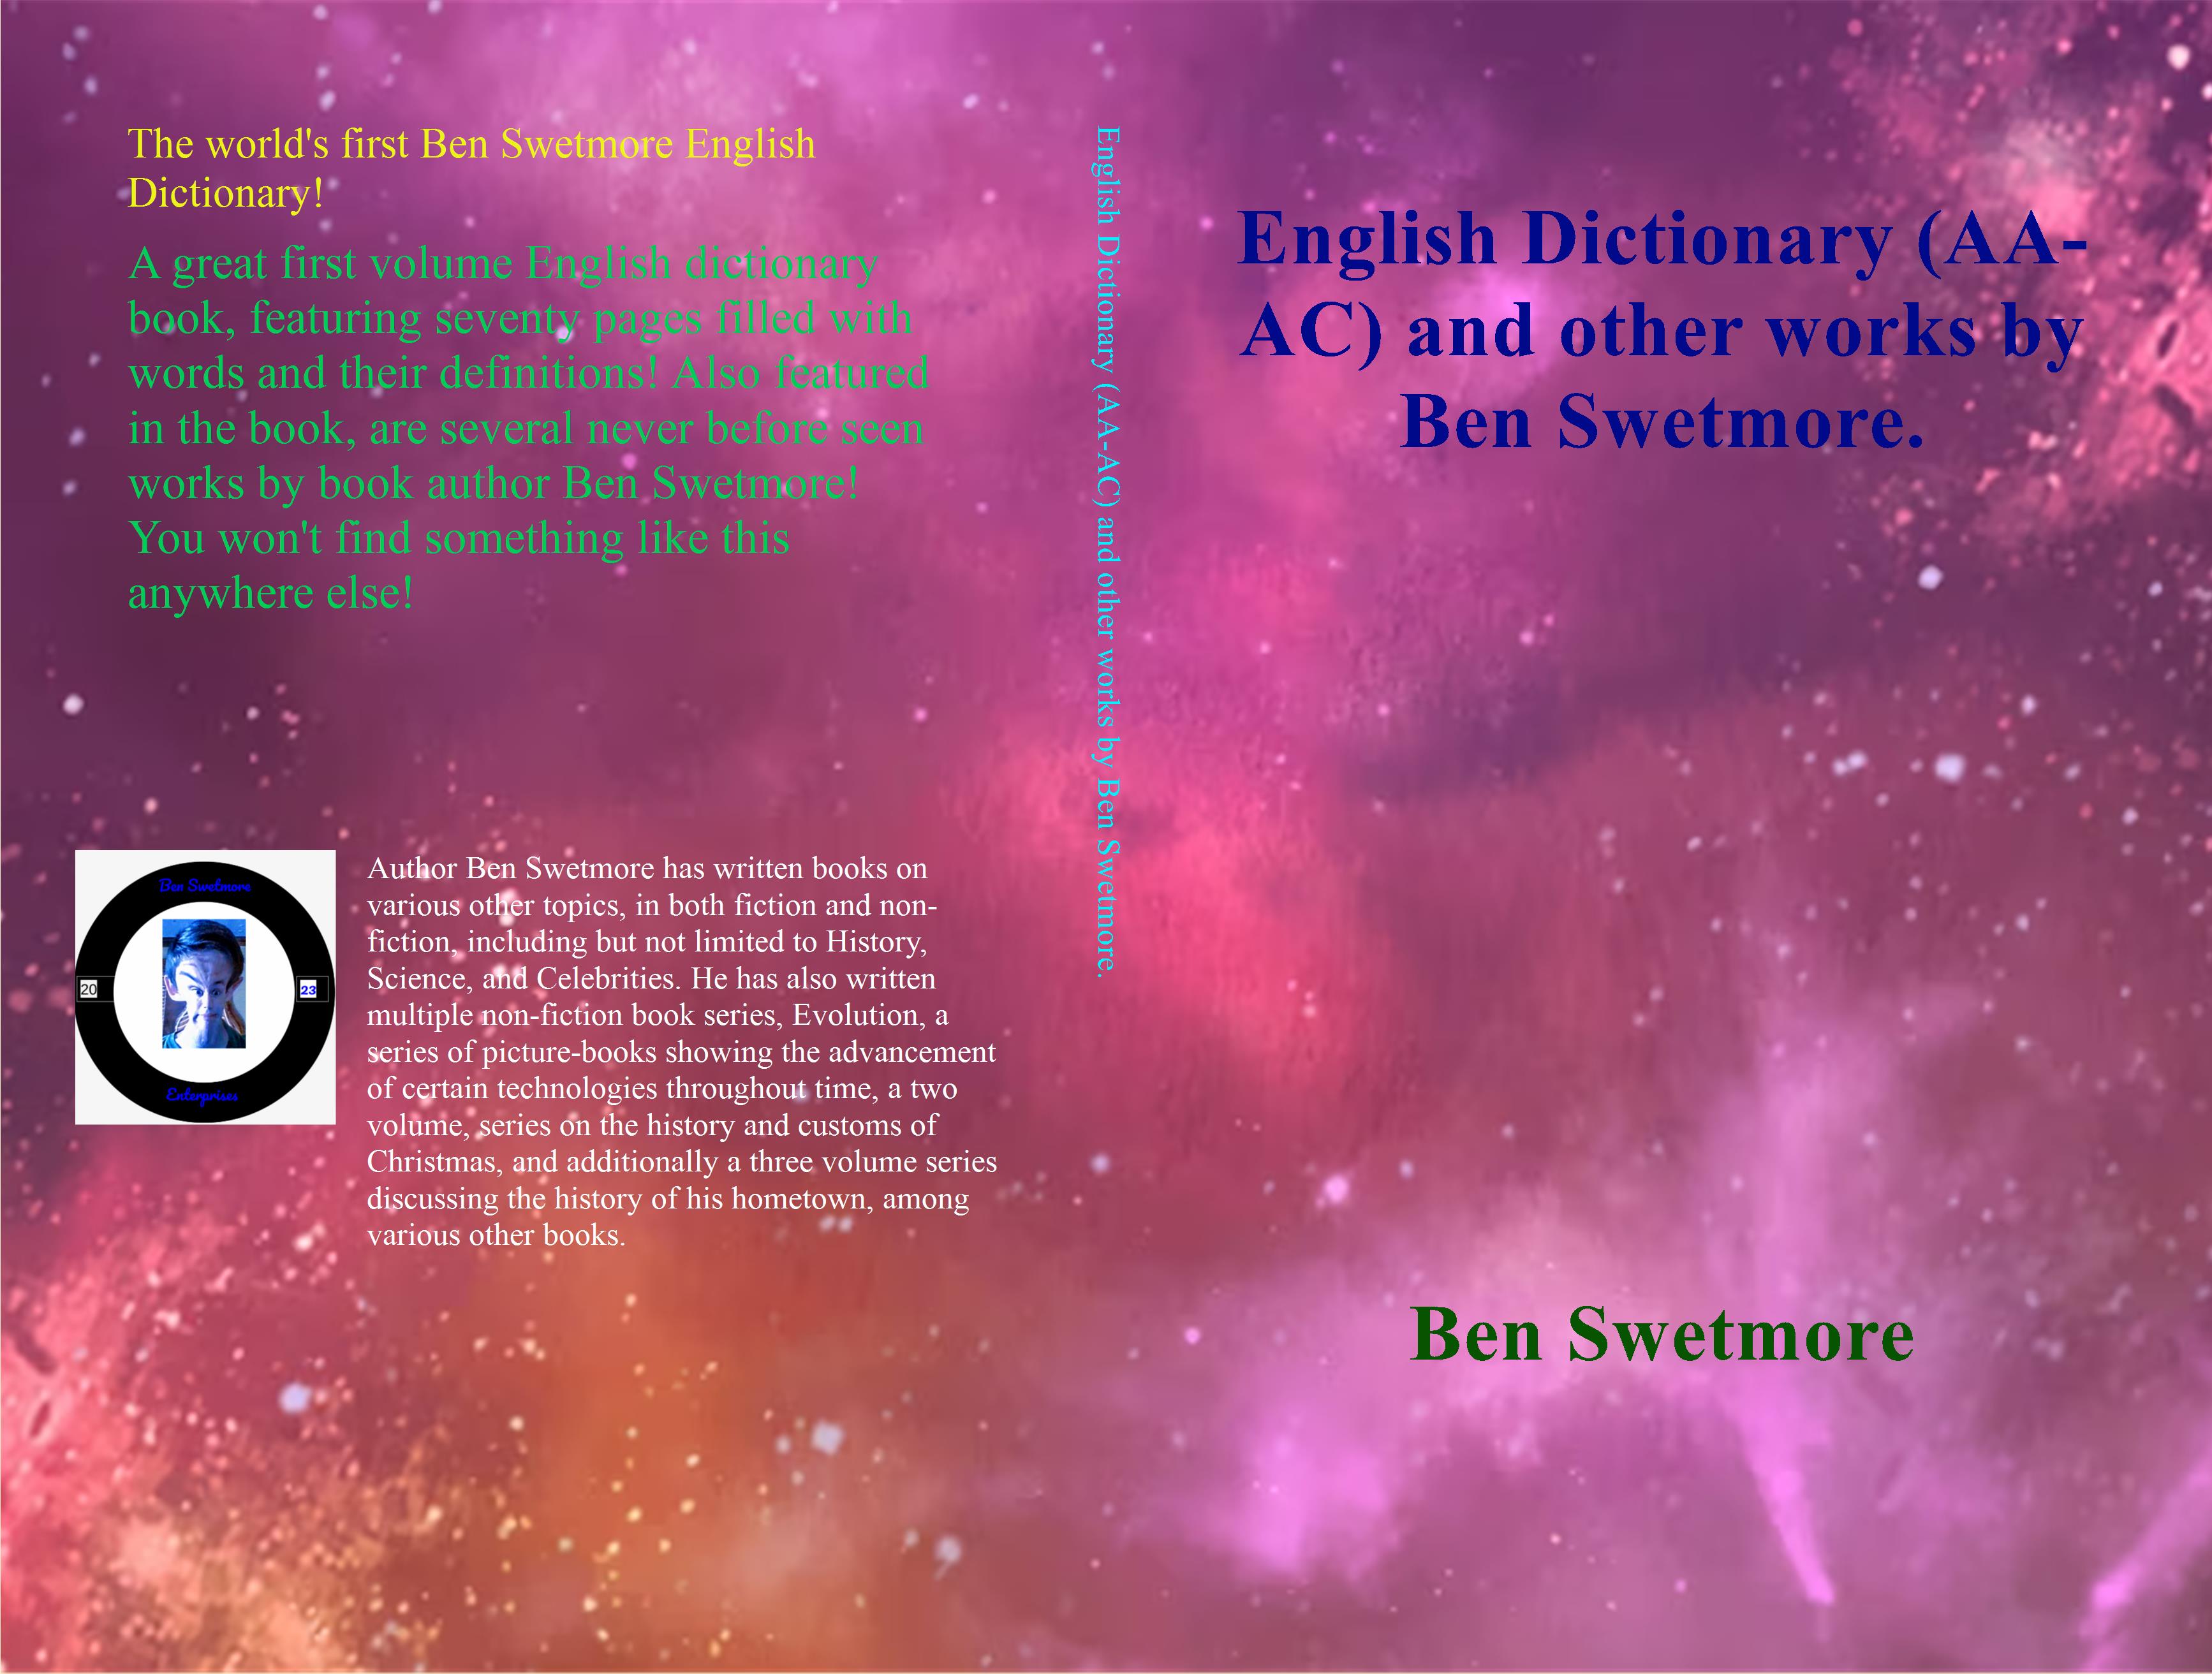 English Dictionary (AA-AC) and other works by Ben Swetmore. cover image